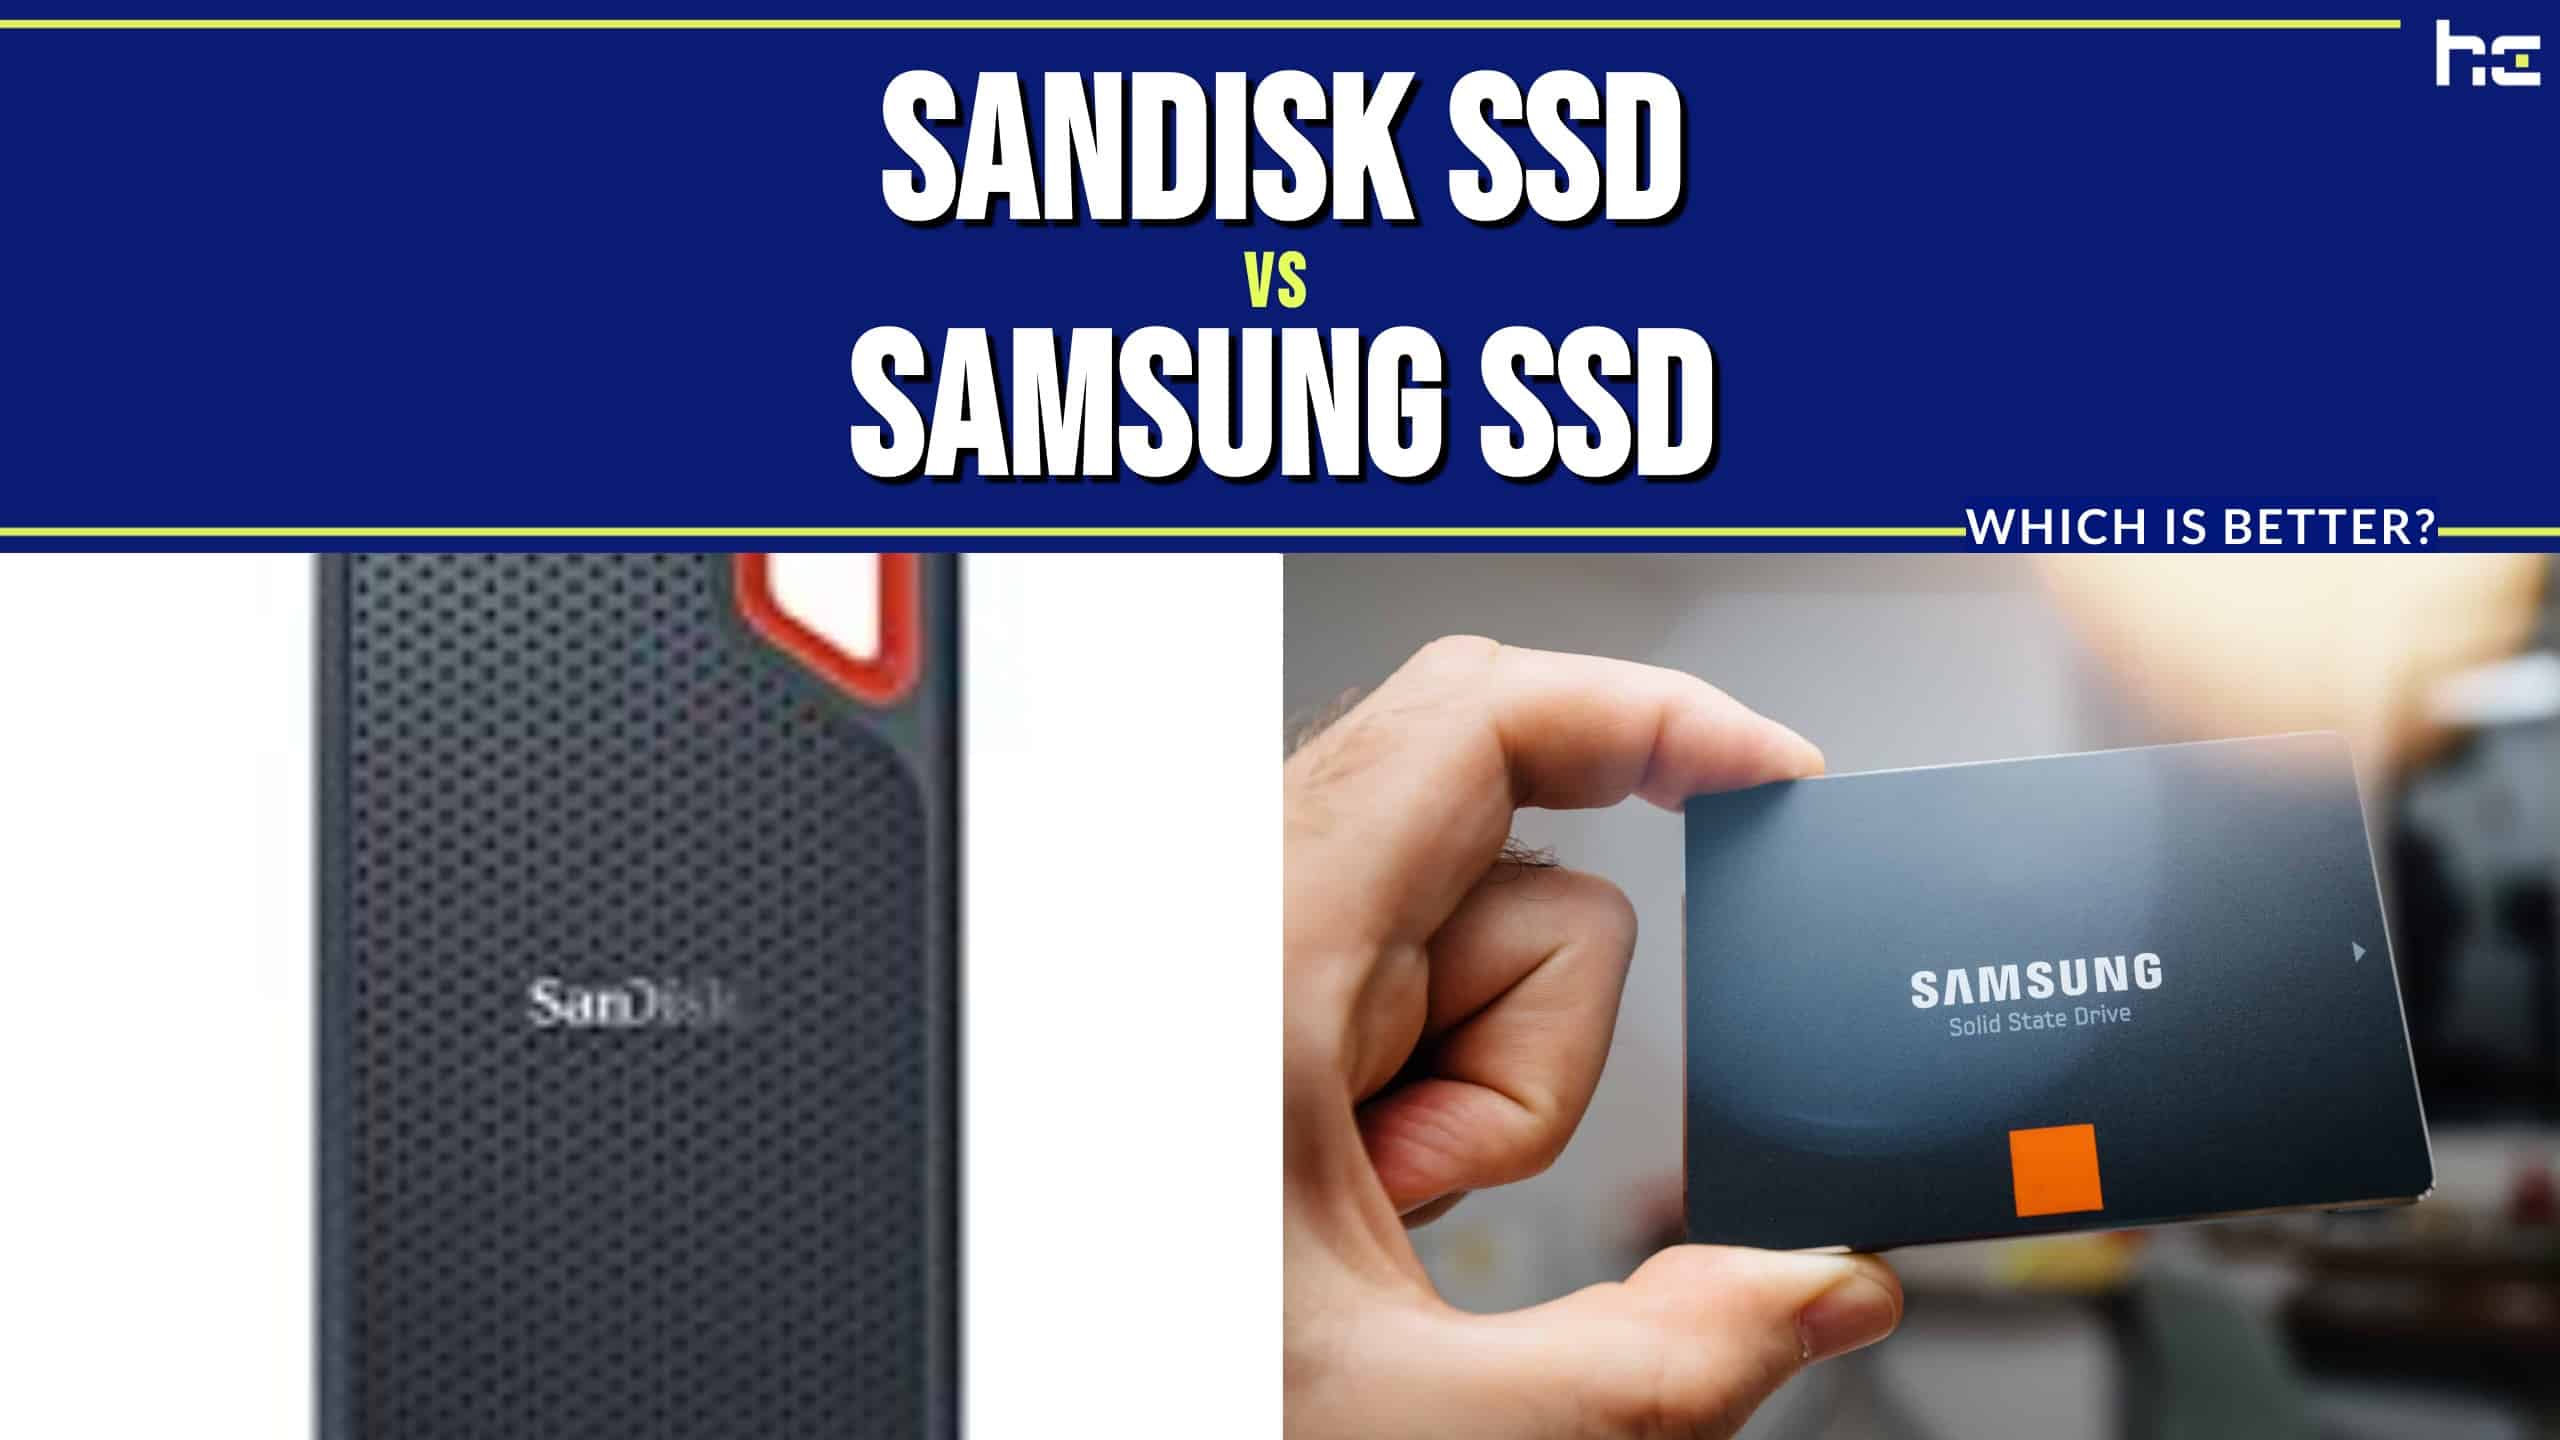 SanDisk Extreme 4 To NVMe SSD, disque externe, U…